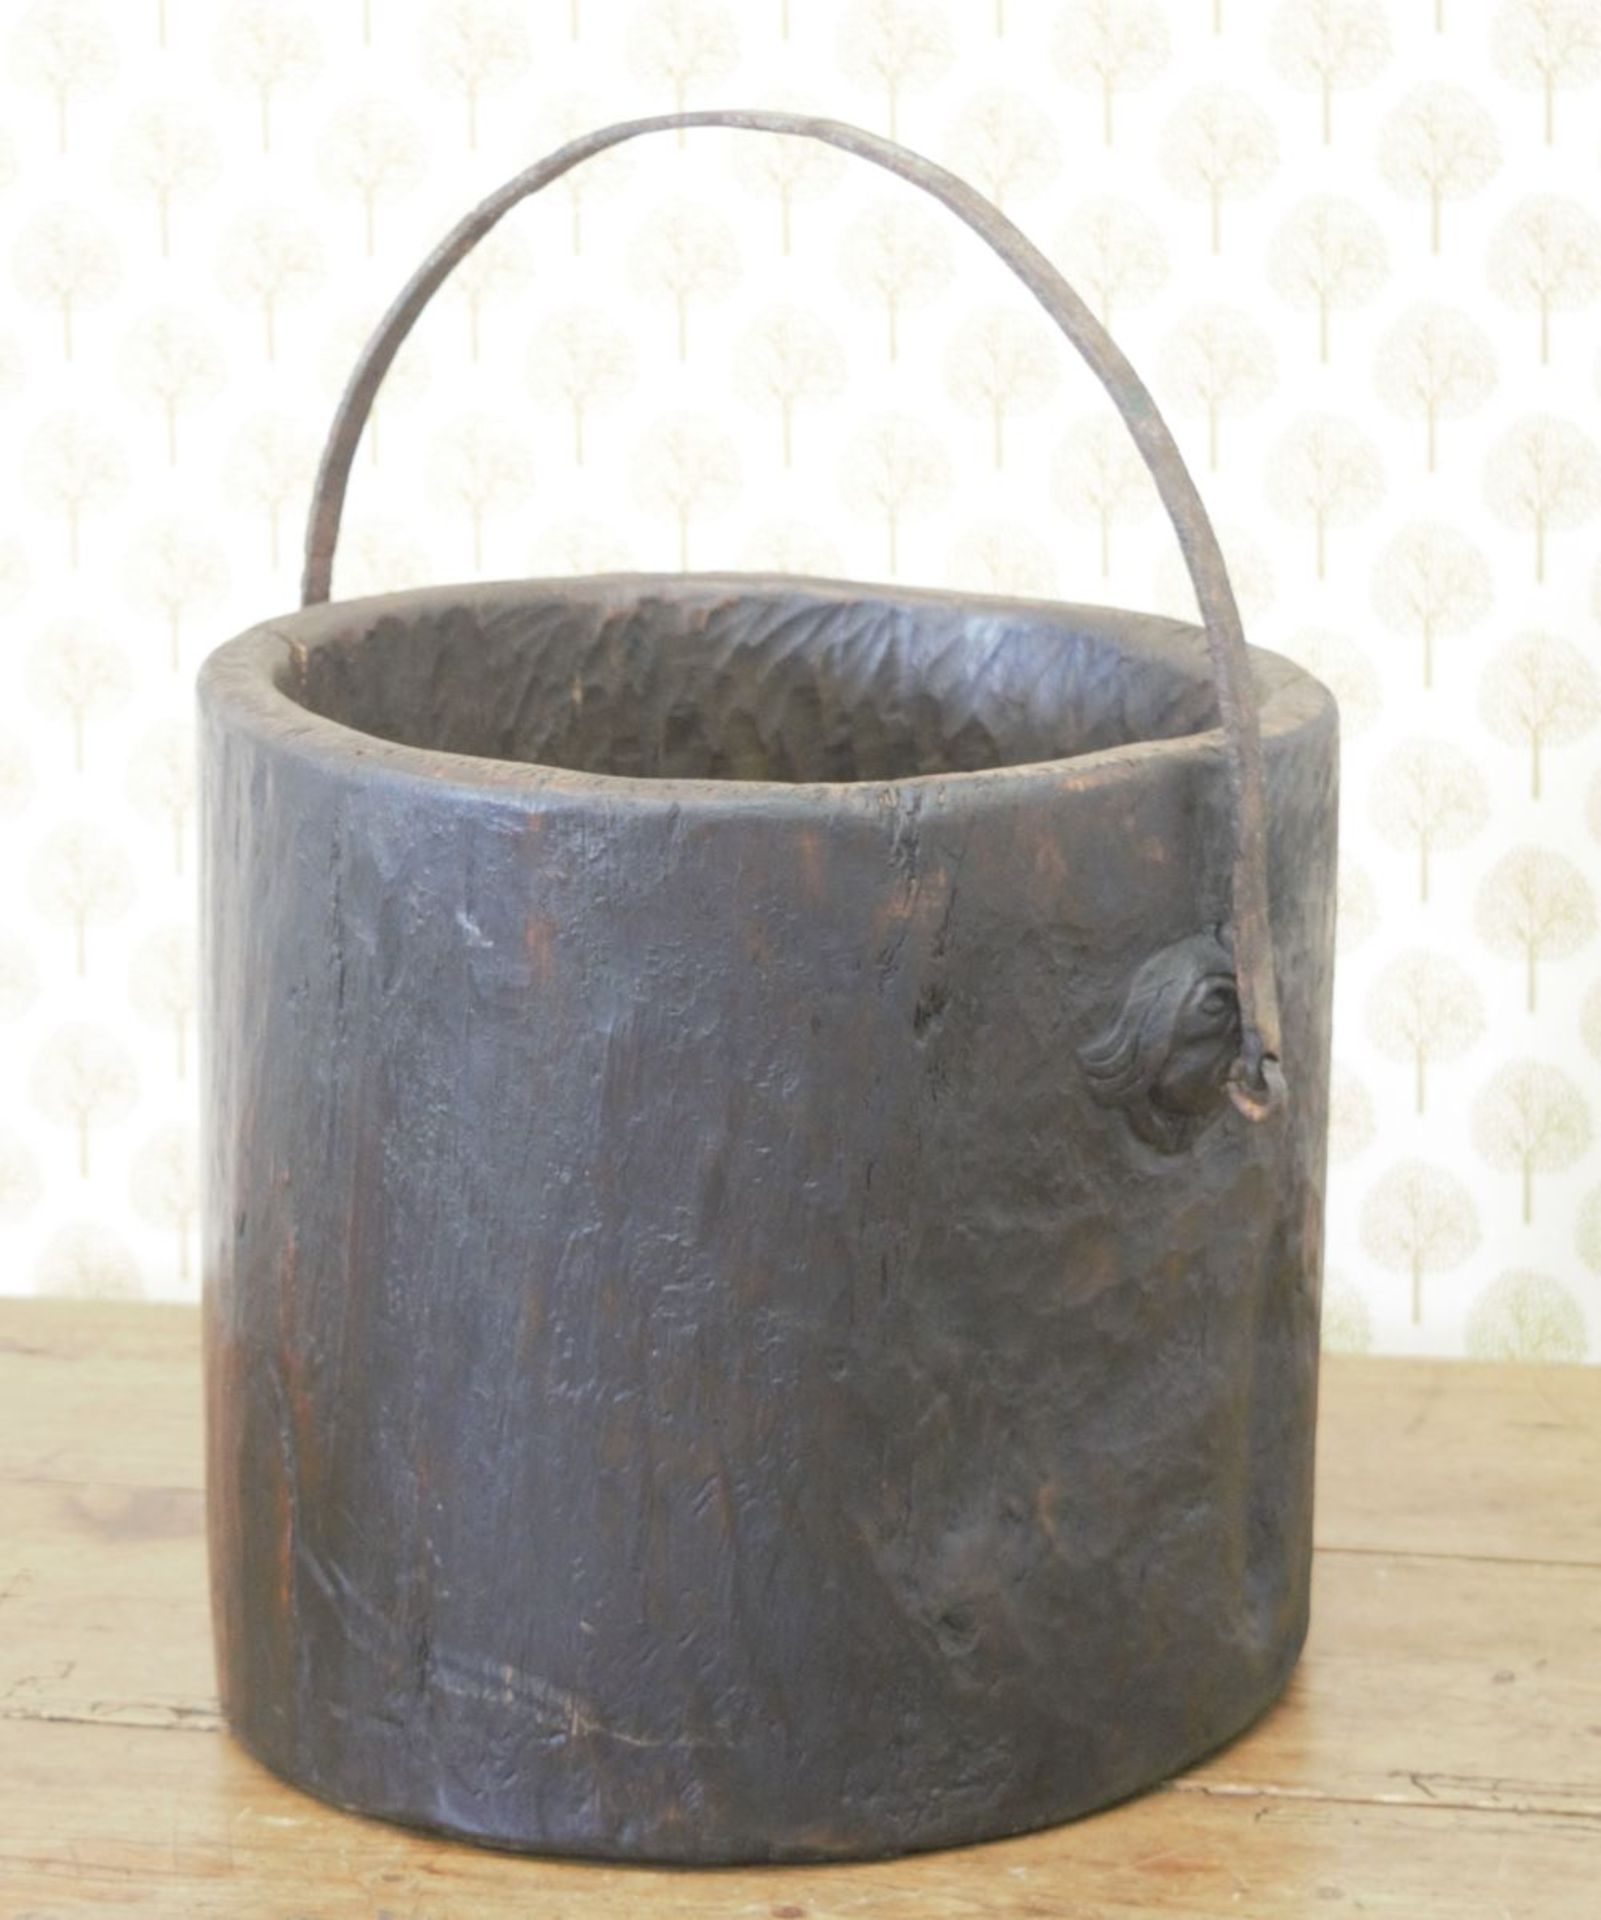 EARLY 18/19TH-CENTURY DUGOUT BUCKET - Image 2 of 3